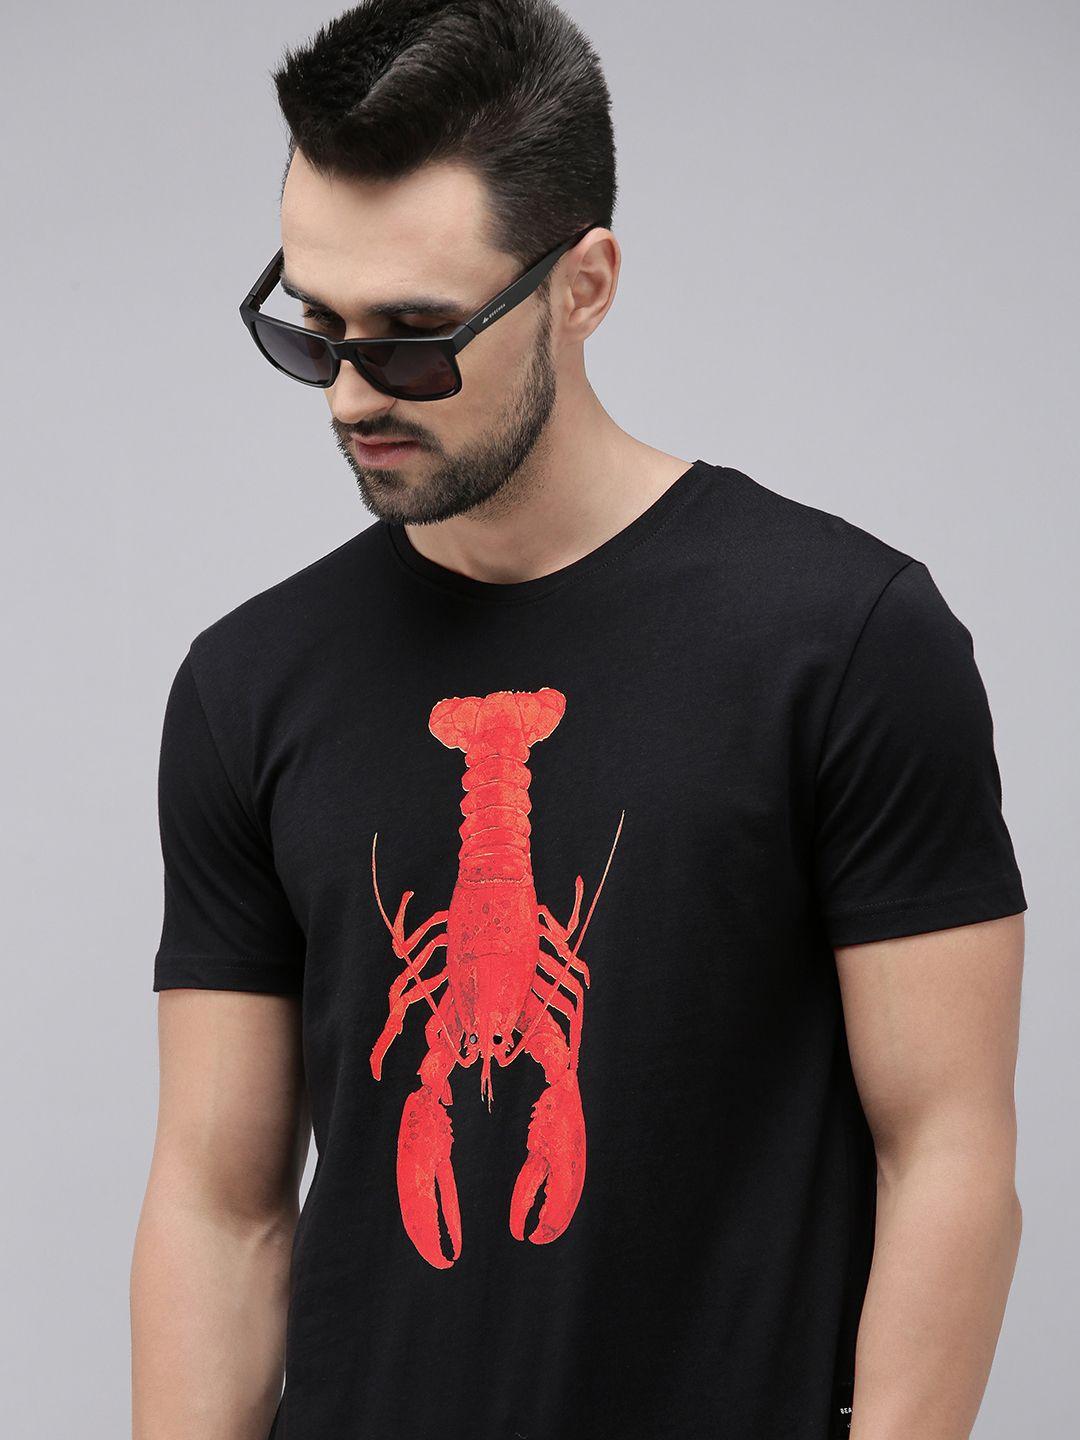 the-bear-house-men-black-&-red-printed-pure-cotton-t-shirt